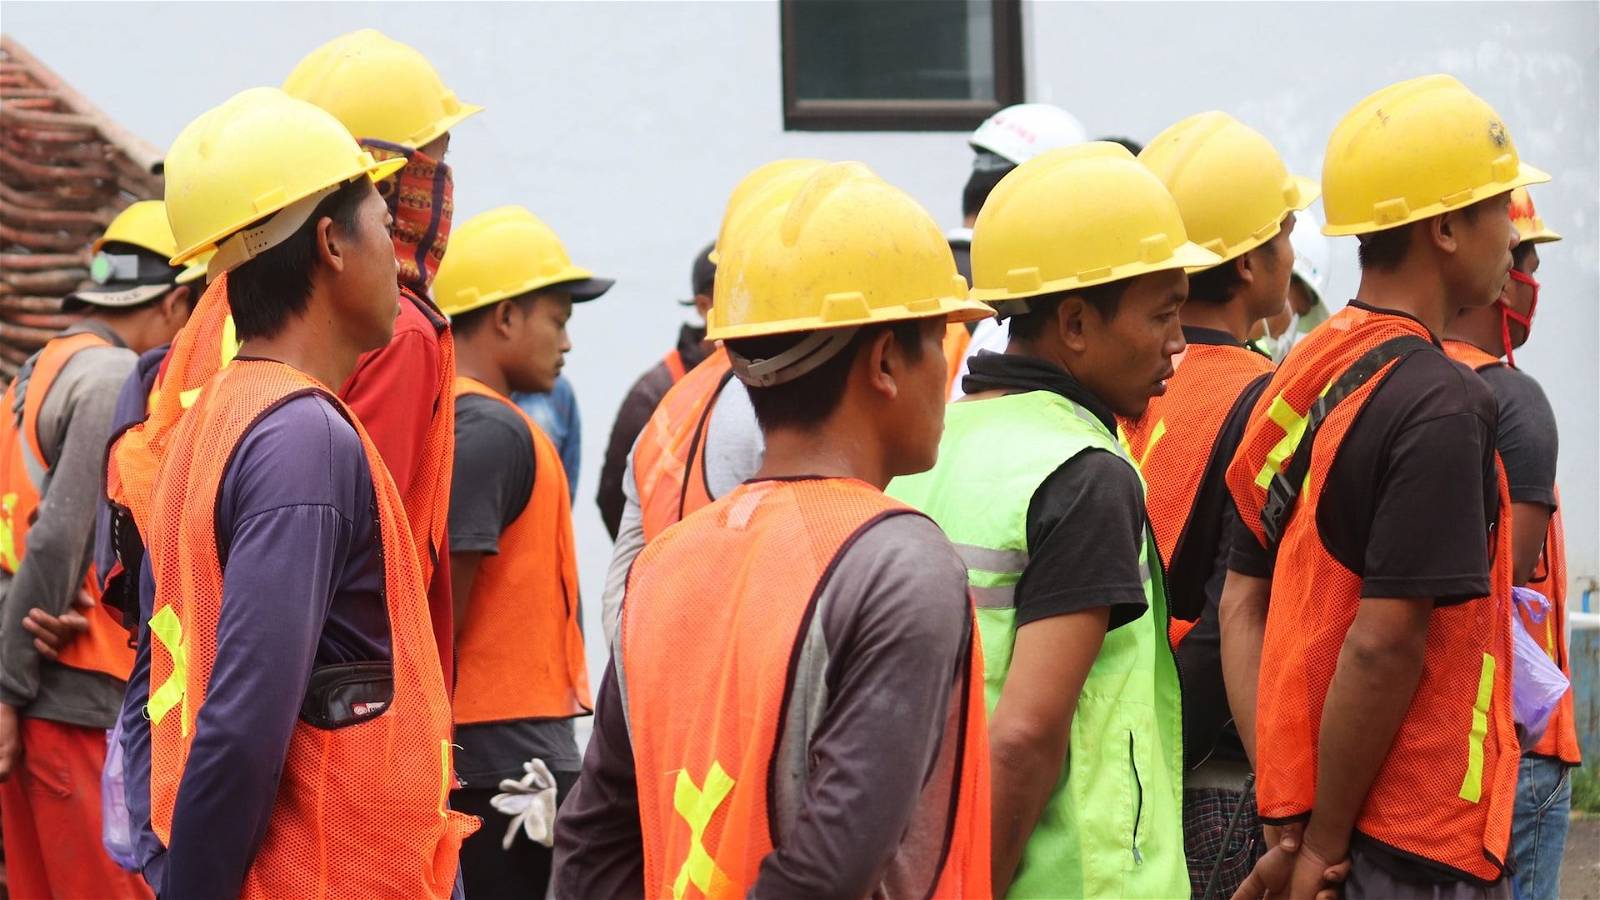 The right policies can protect the workers of Asia and the Pacific